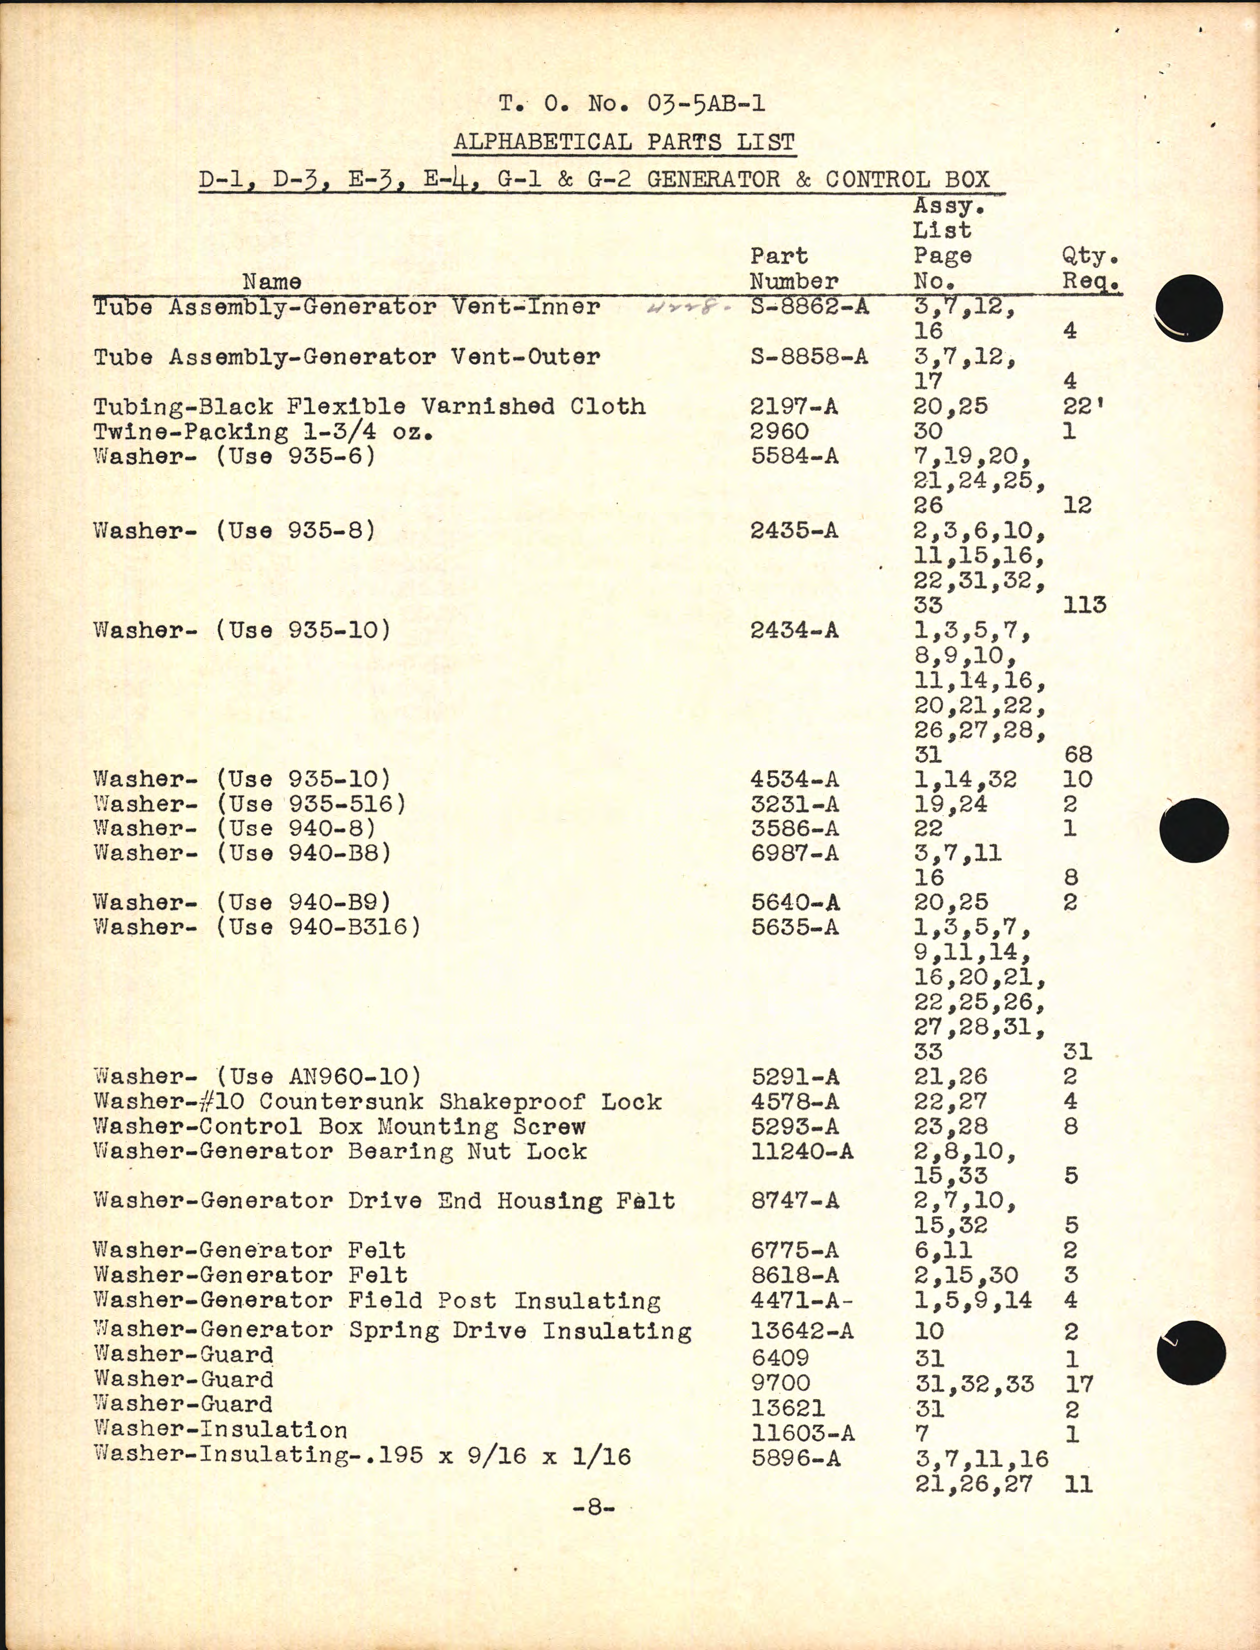 Sample page 8 from AirCorps Library document: Alphabetical Parts List for D-1, D-3, E-3, G-1, and G-2 Generators and Control Box